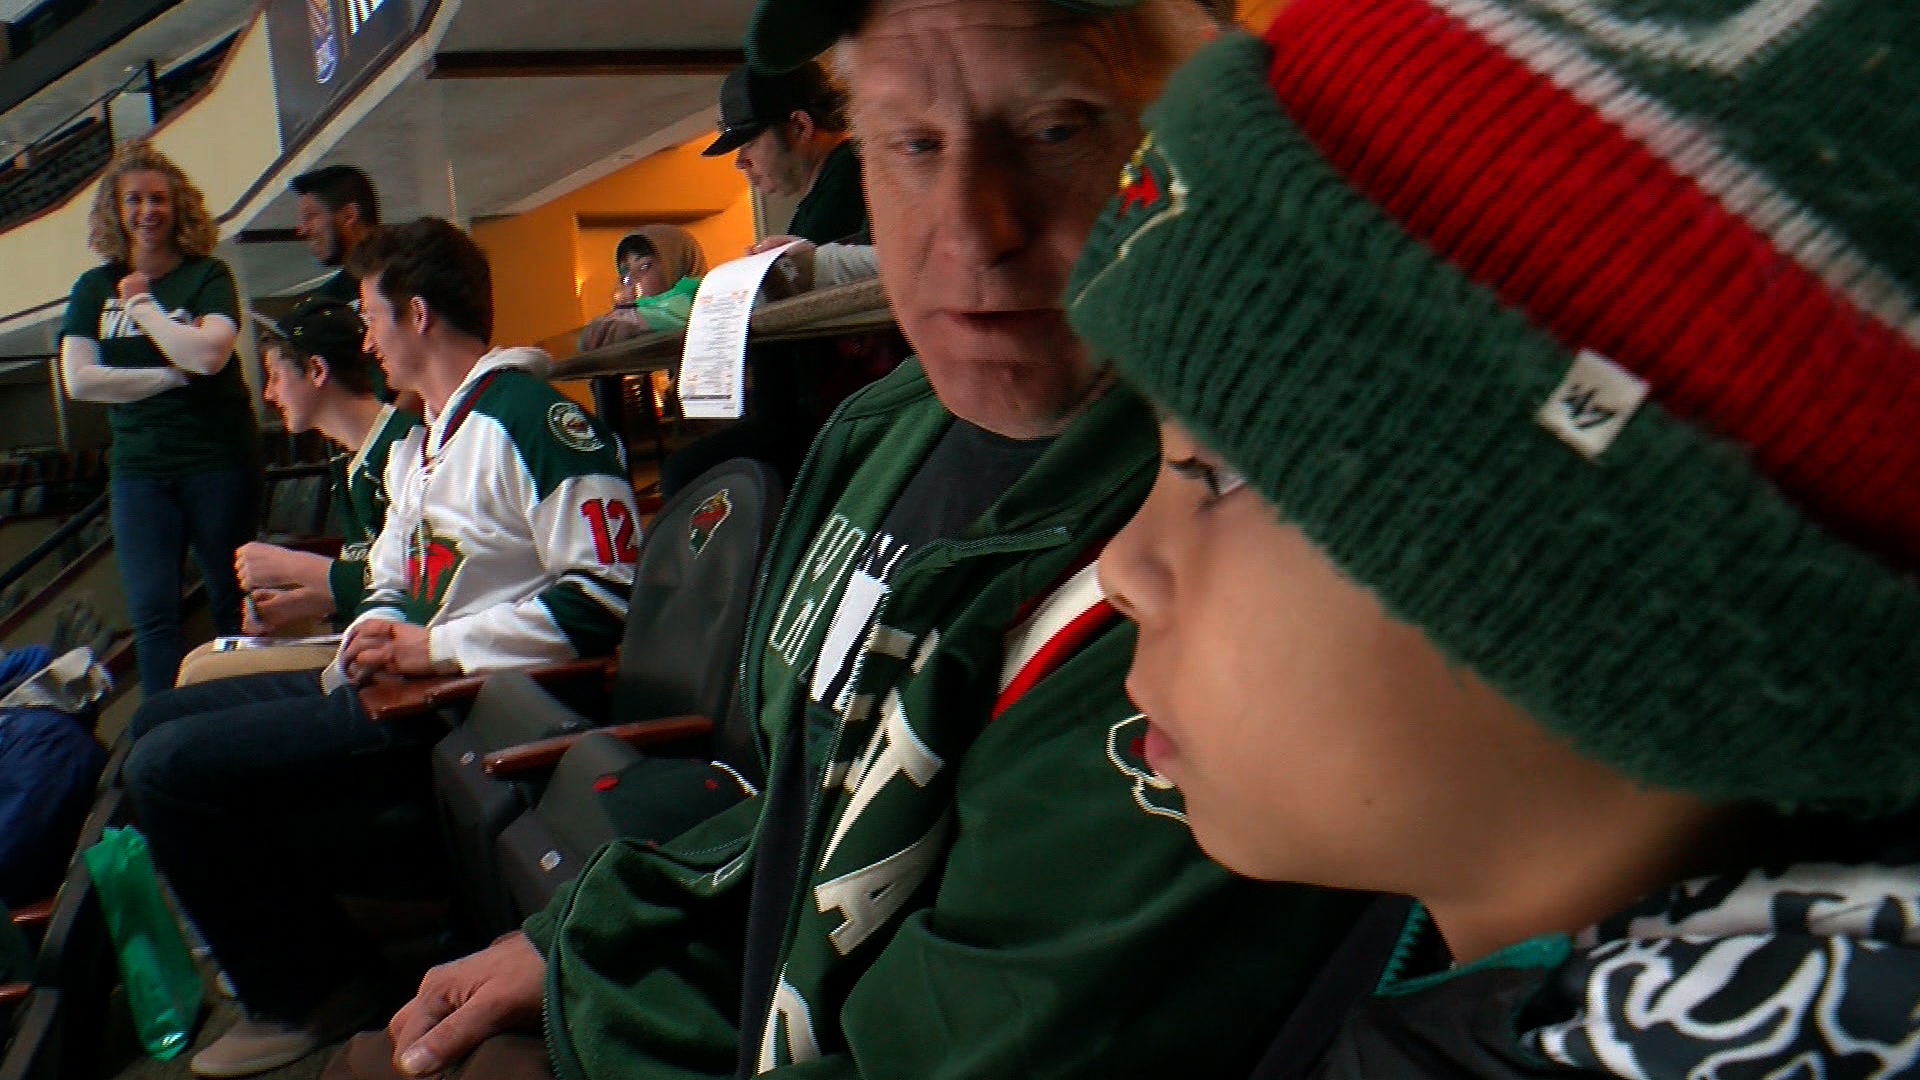 Event Helps Hockey Fans With Autism Prepare For Wild Game